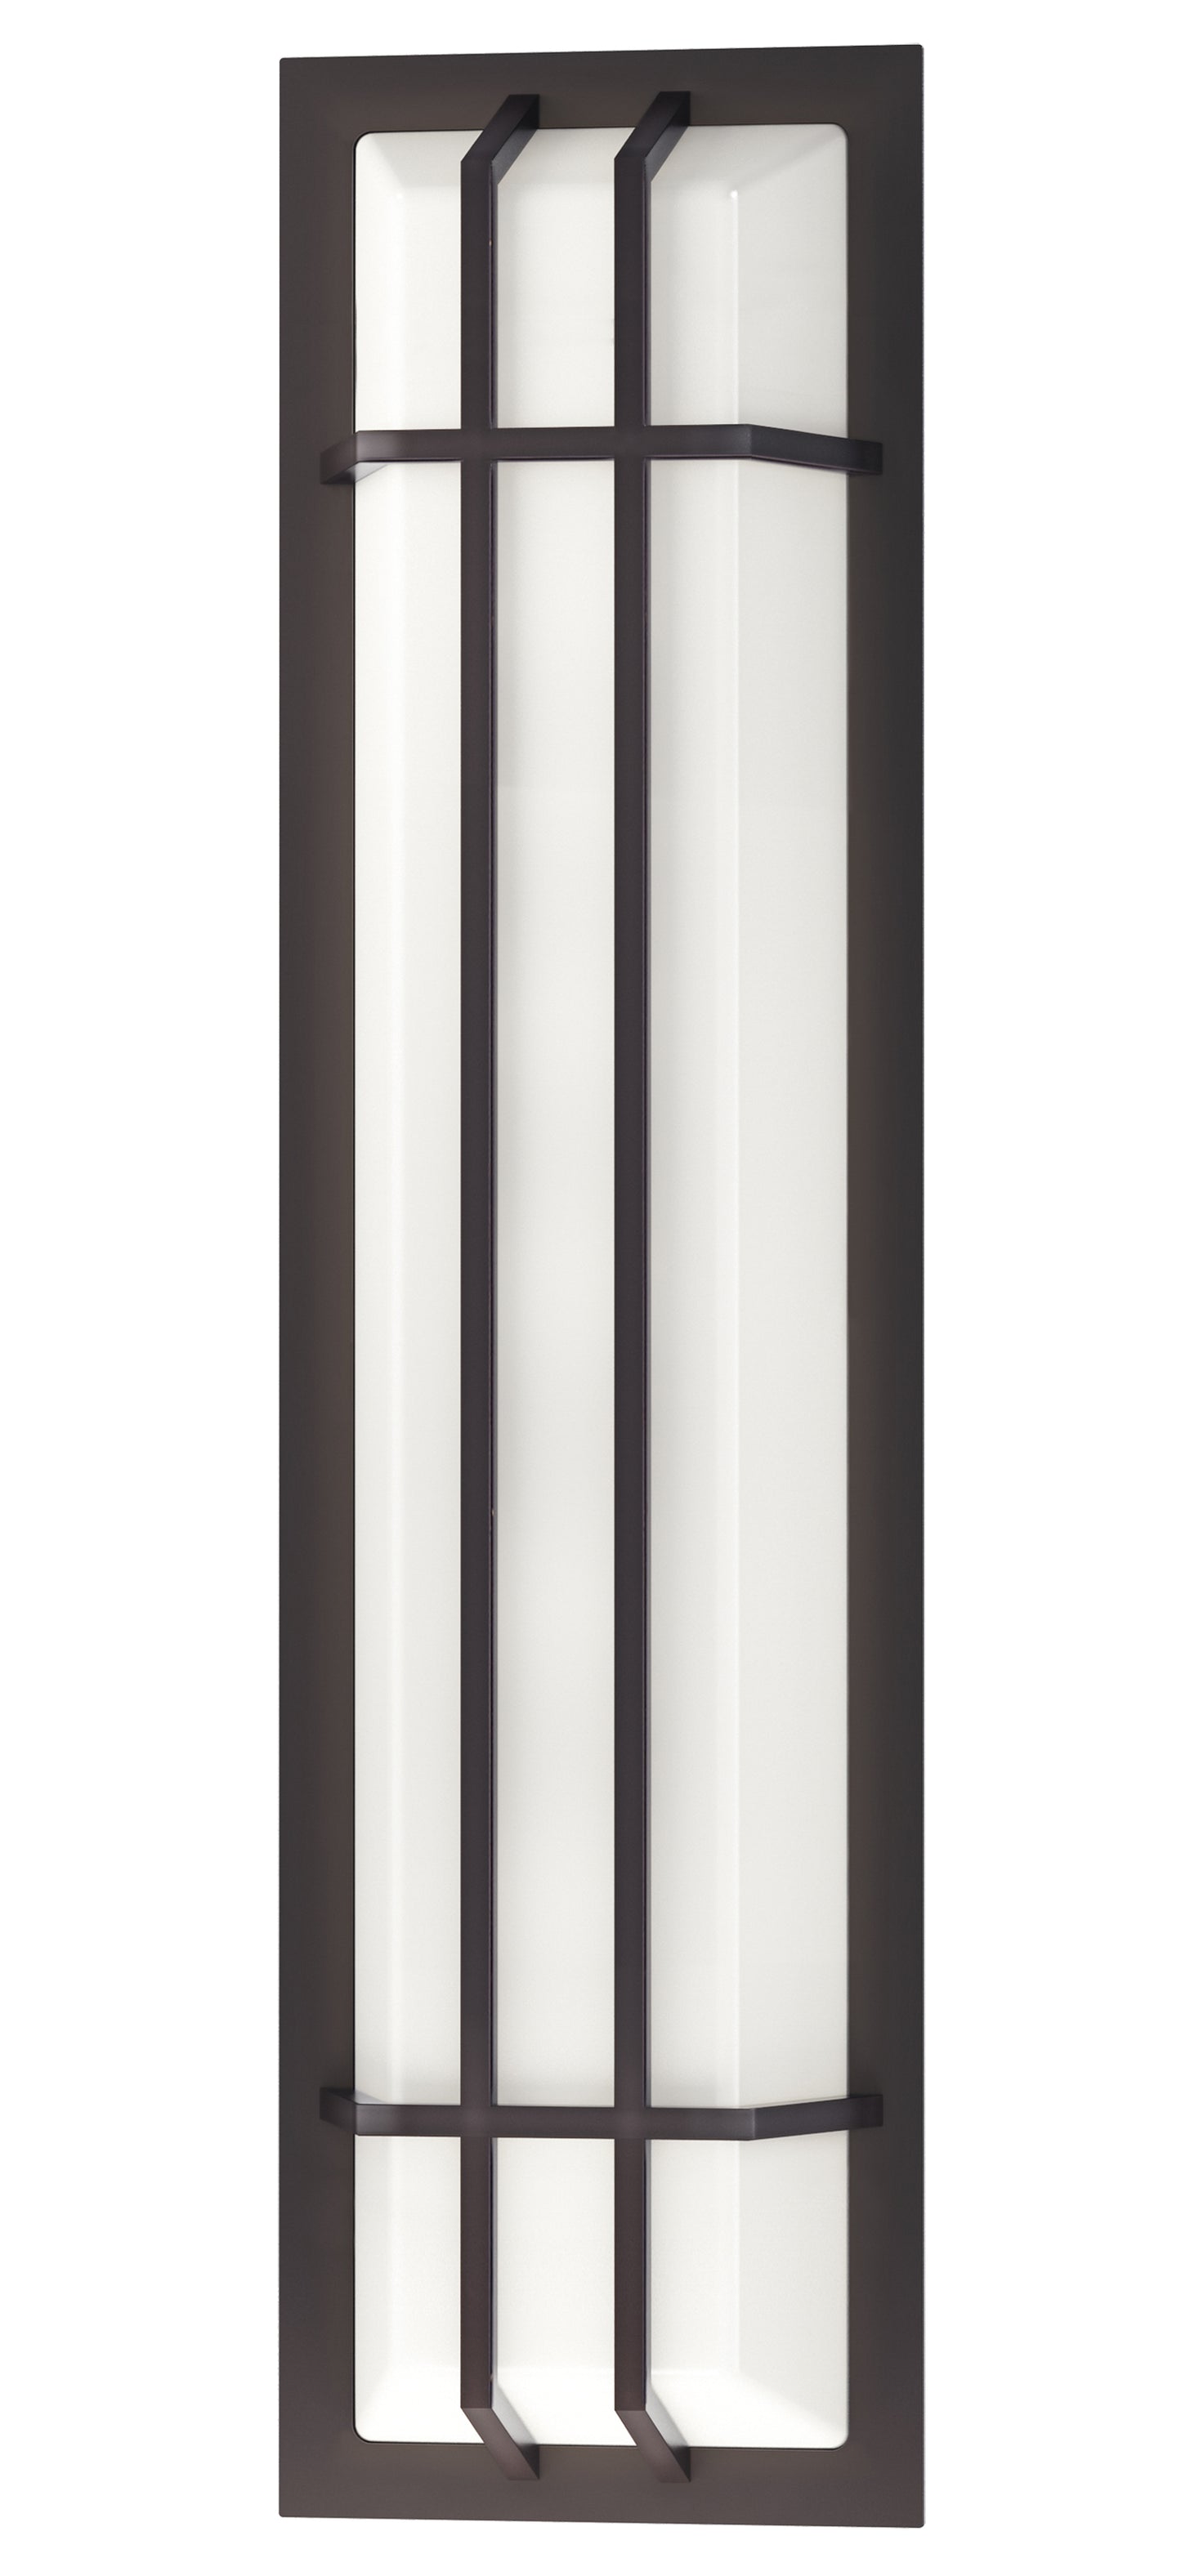 Maxim Trilogy 32" LED Outdoor Wall Sconce